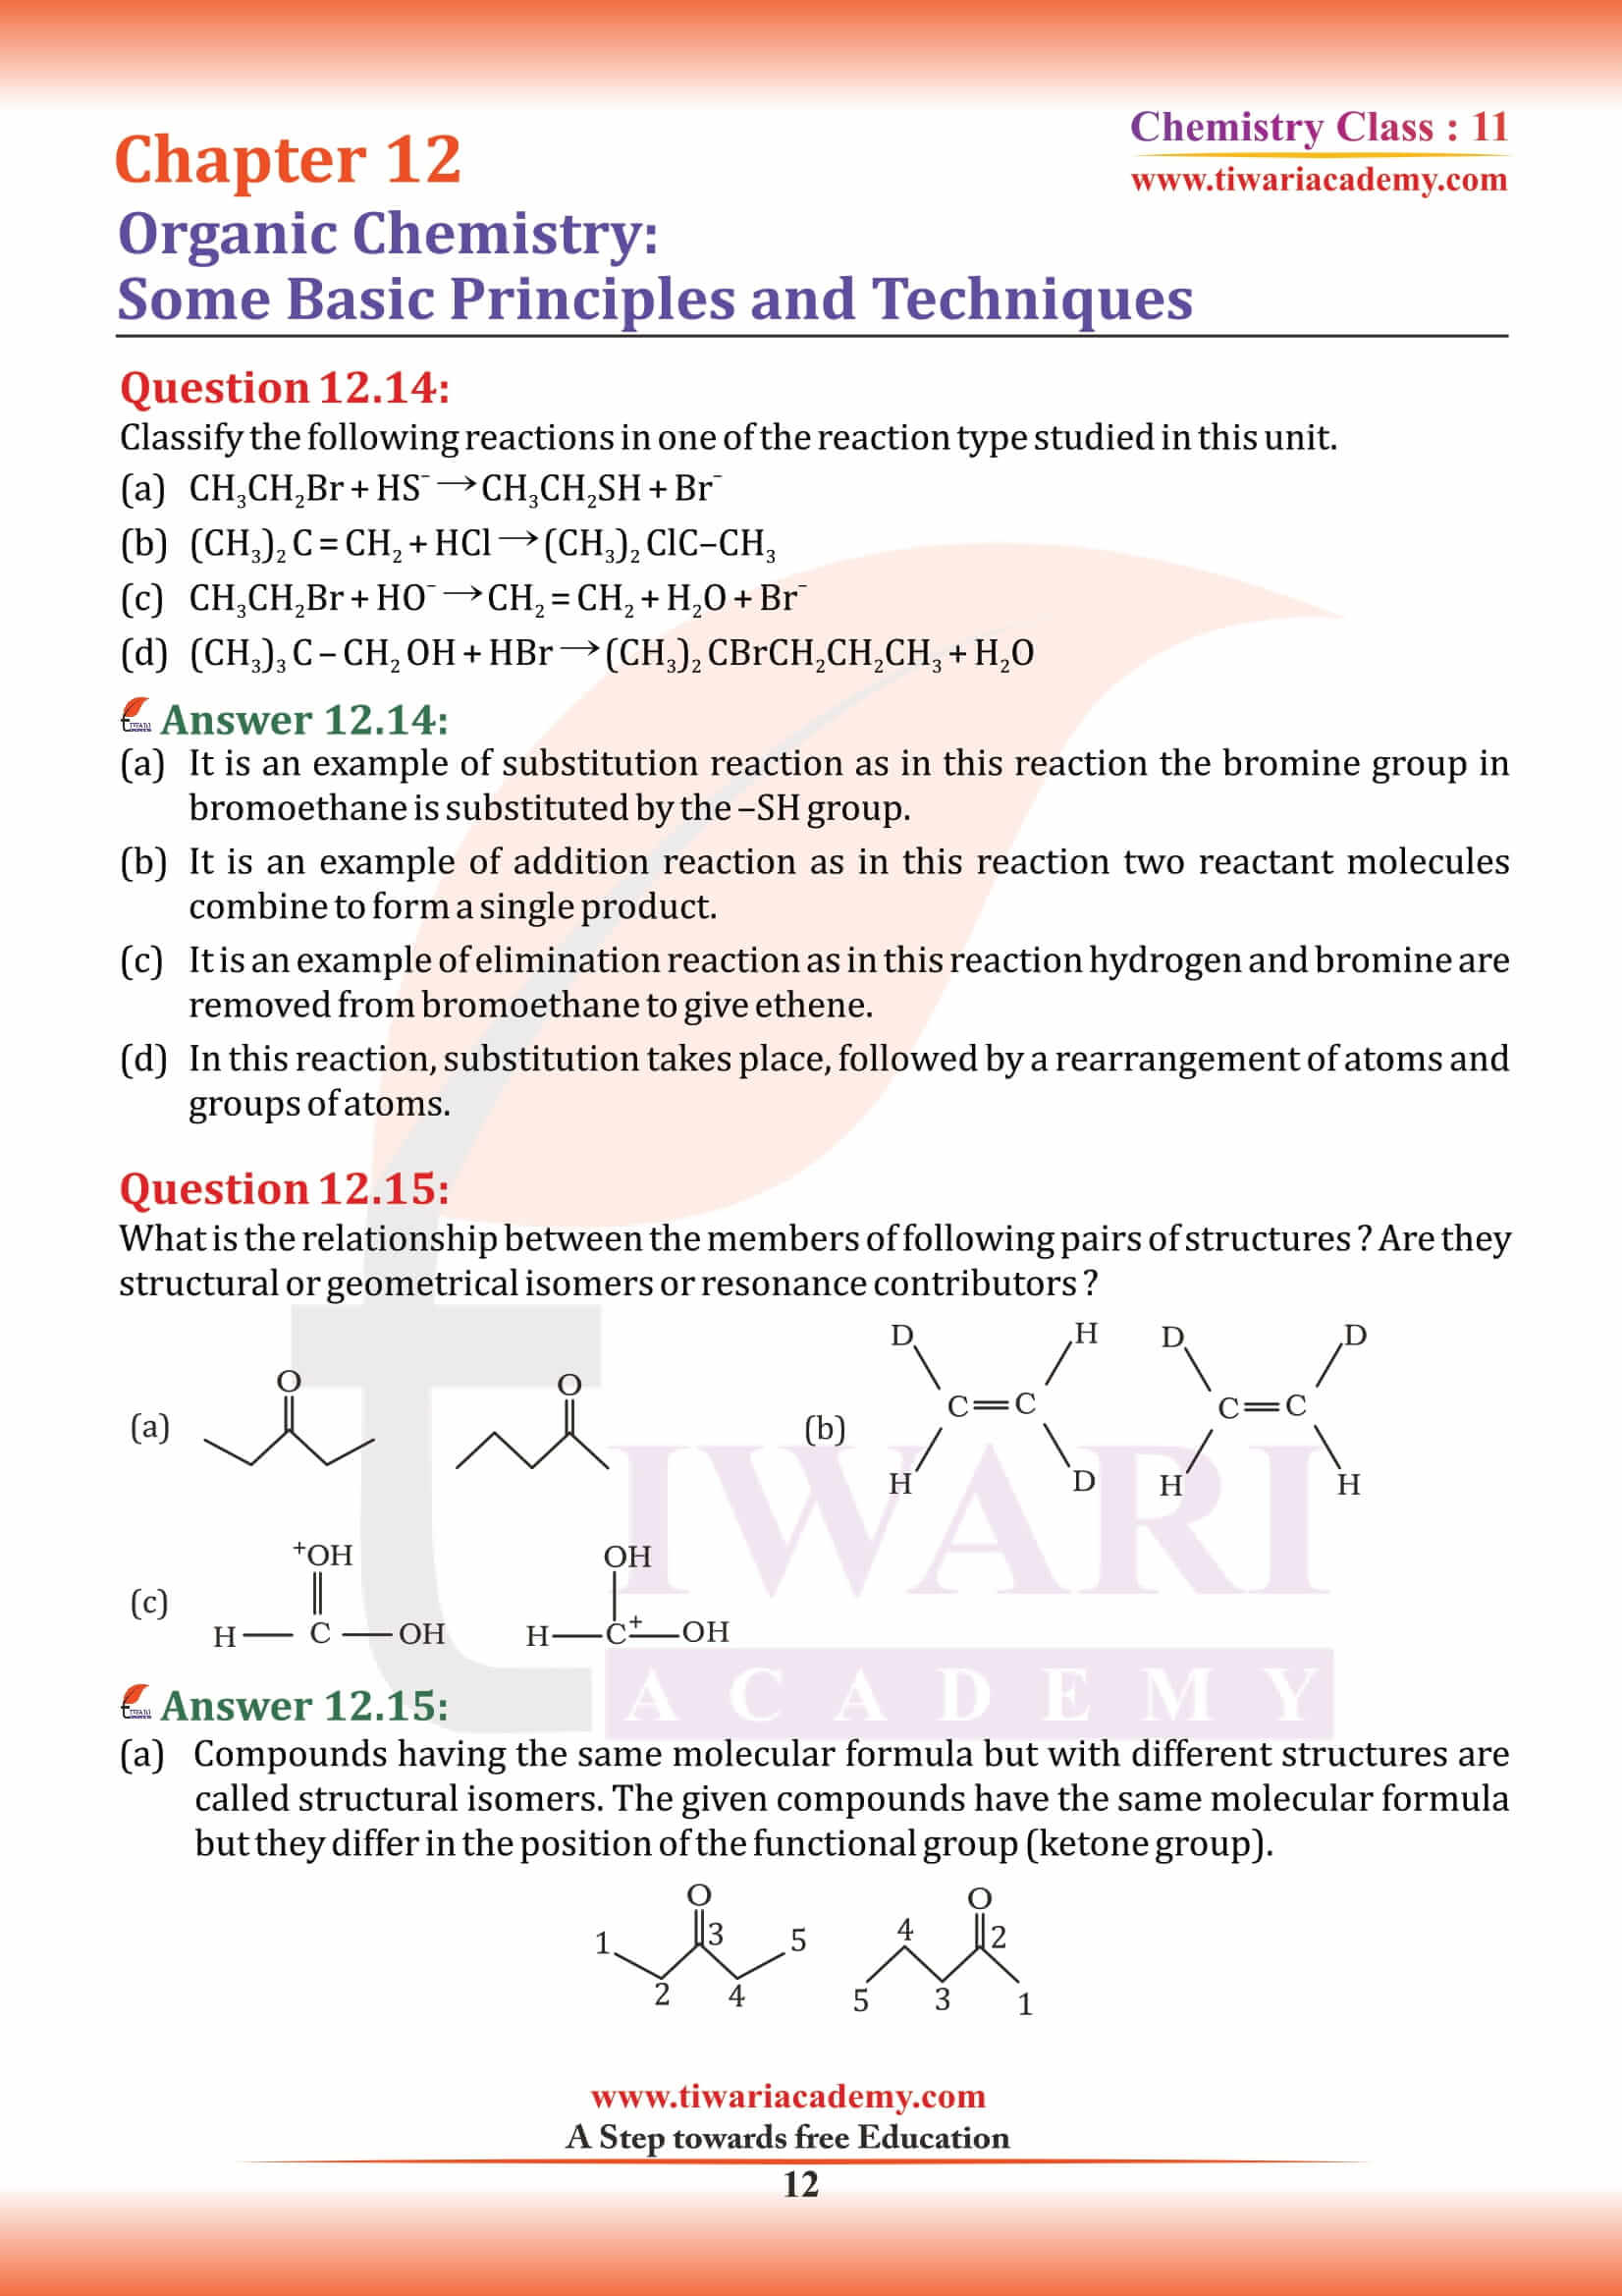 Class 11 Chemistry Chapter 12 exercise answers